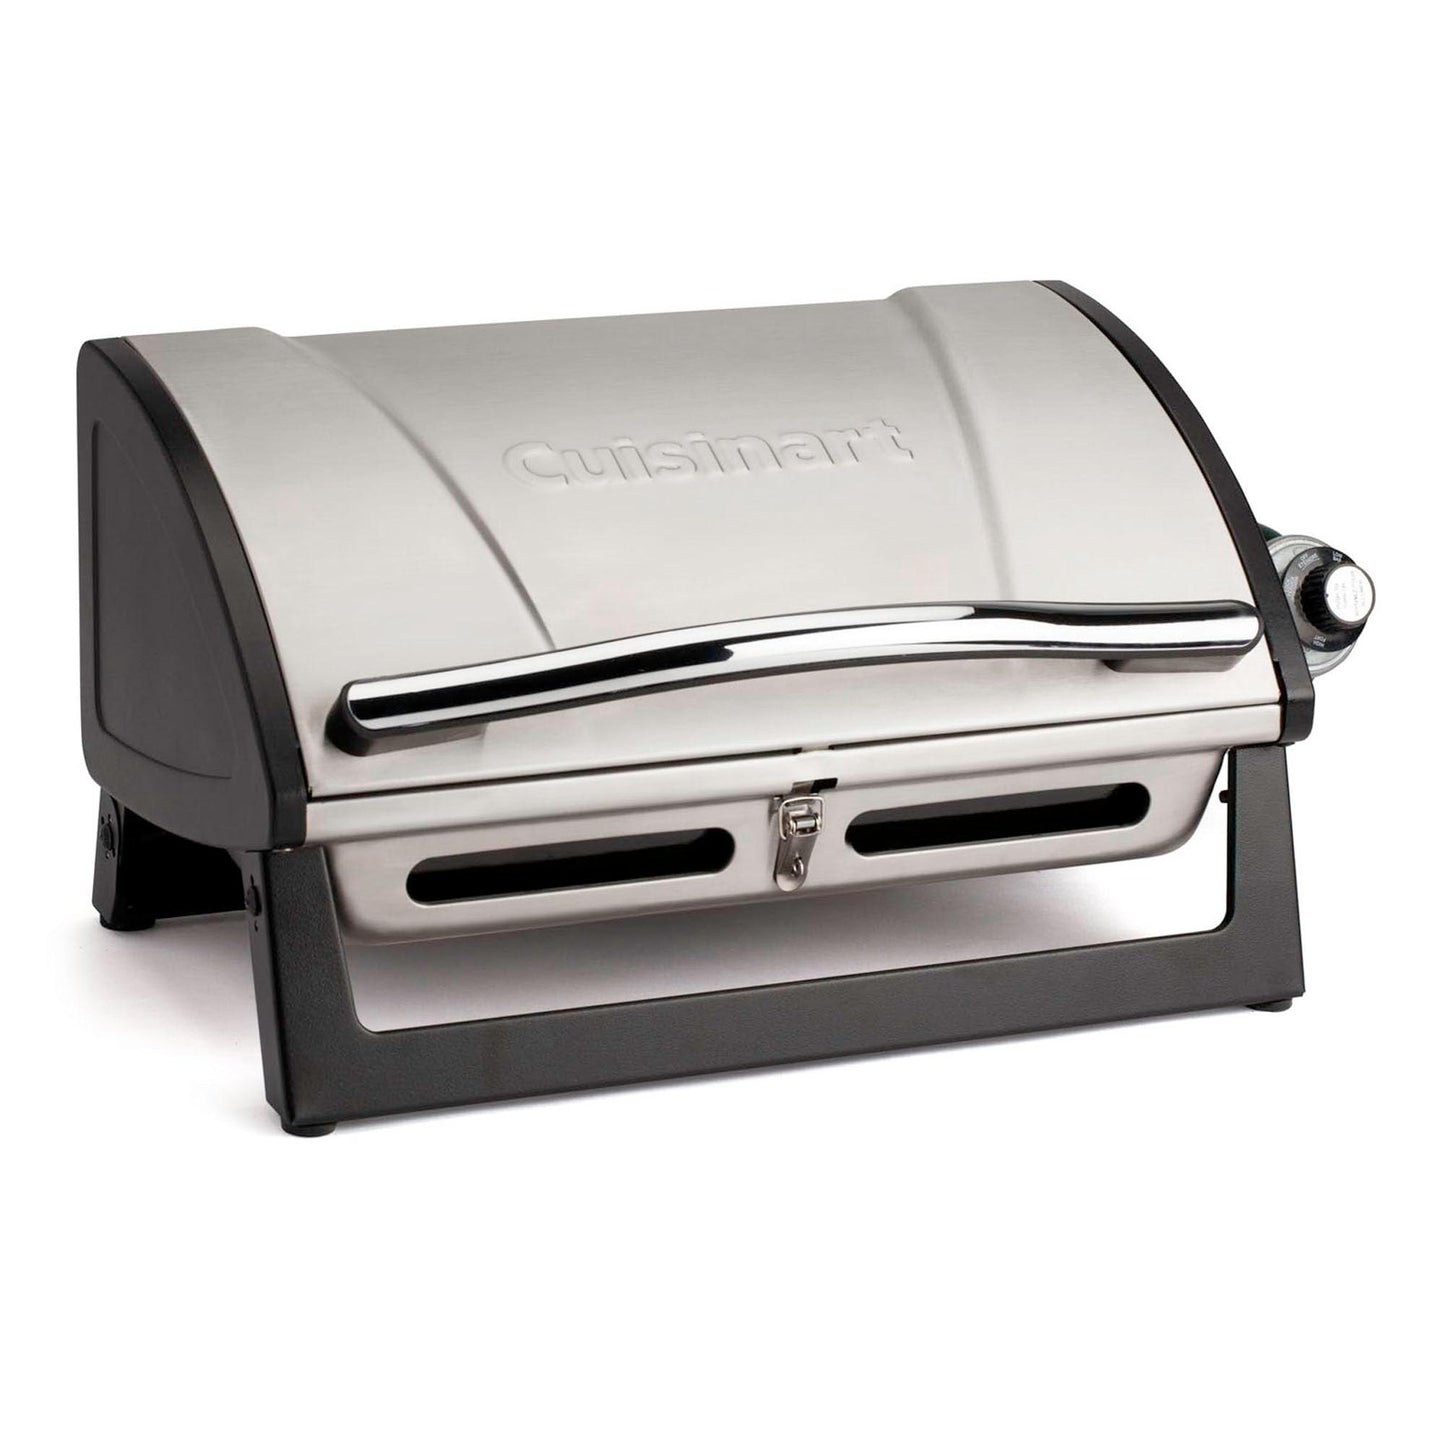 Cuisinart CGG-059A Grillster 8,000 BTU Portable Propane Tabletop Gas Grill - CookCave